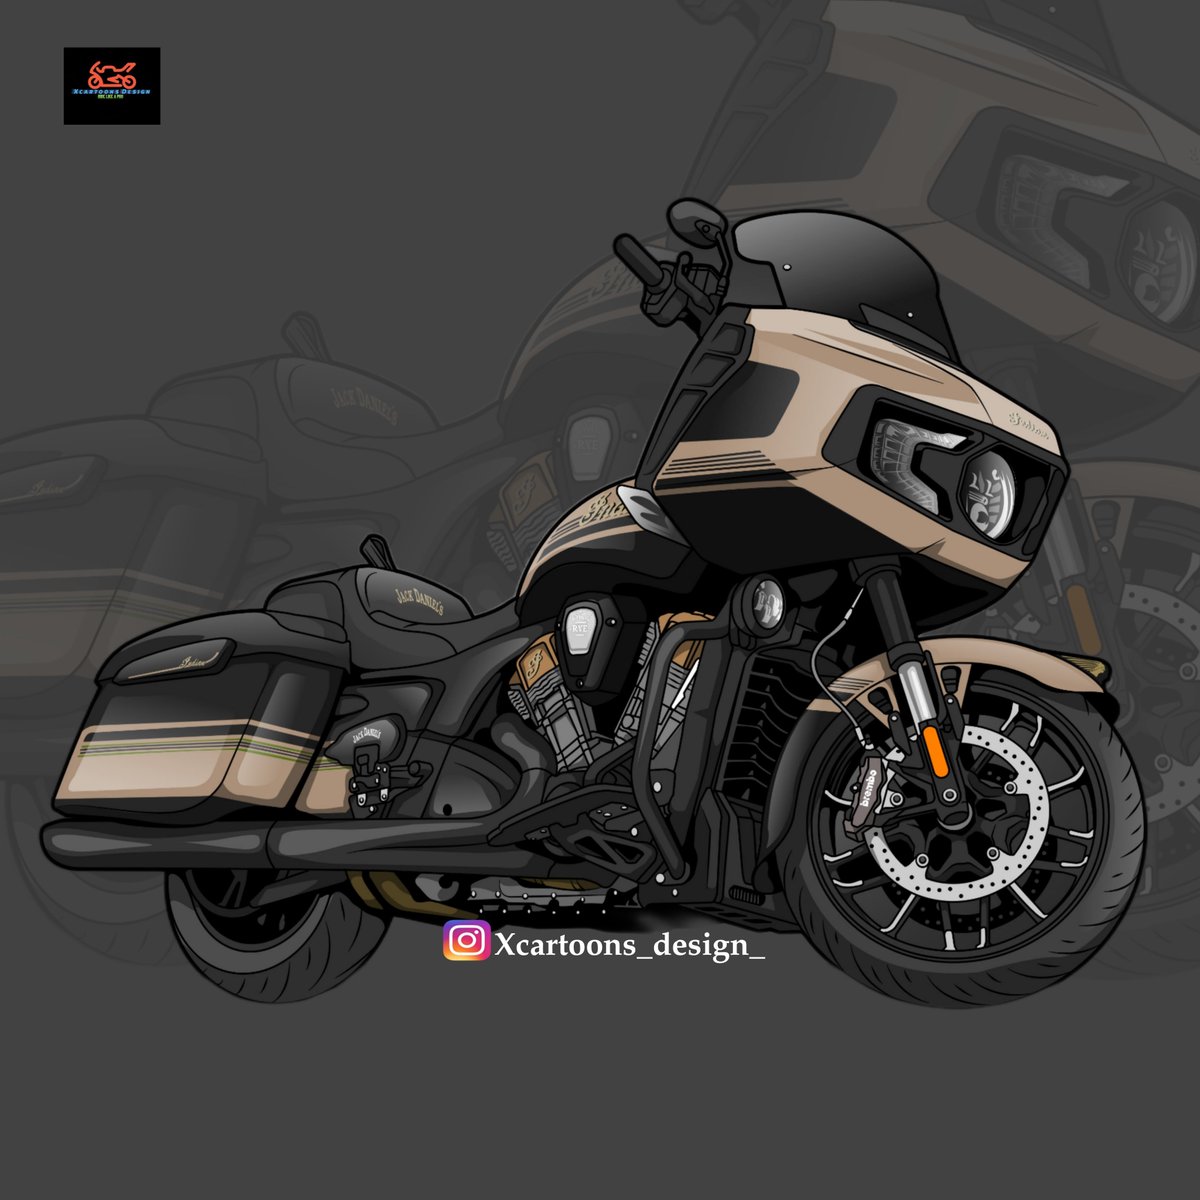 Ready to inject some personality into your motorcycle brand? Let's cartoonize it.

Hit me up on my dm for more details 

#roadglide #harleydavidson #streetglide #harley #roadking #bagger #softail #dynanation #sportster #motorcycle #baggernation #hd #roadglidespecial #bikelife